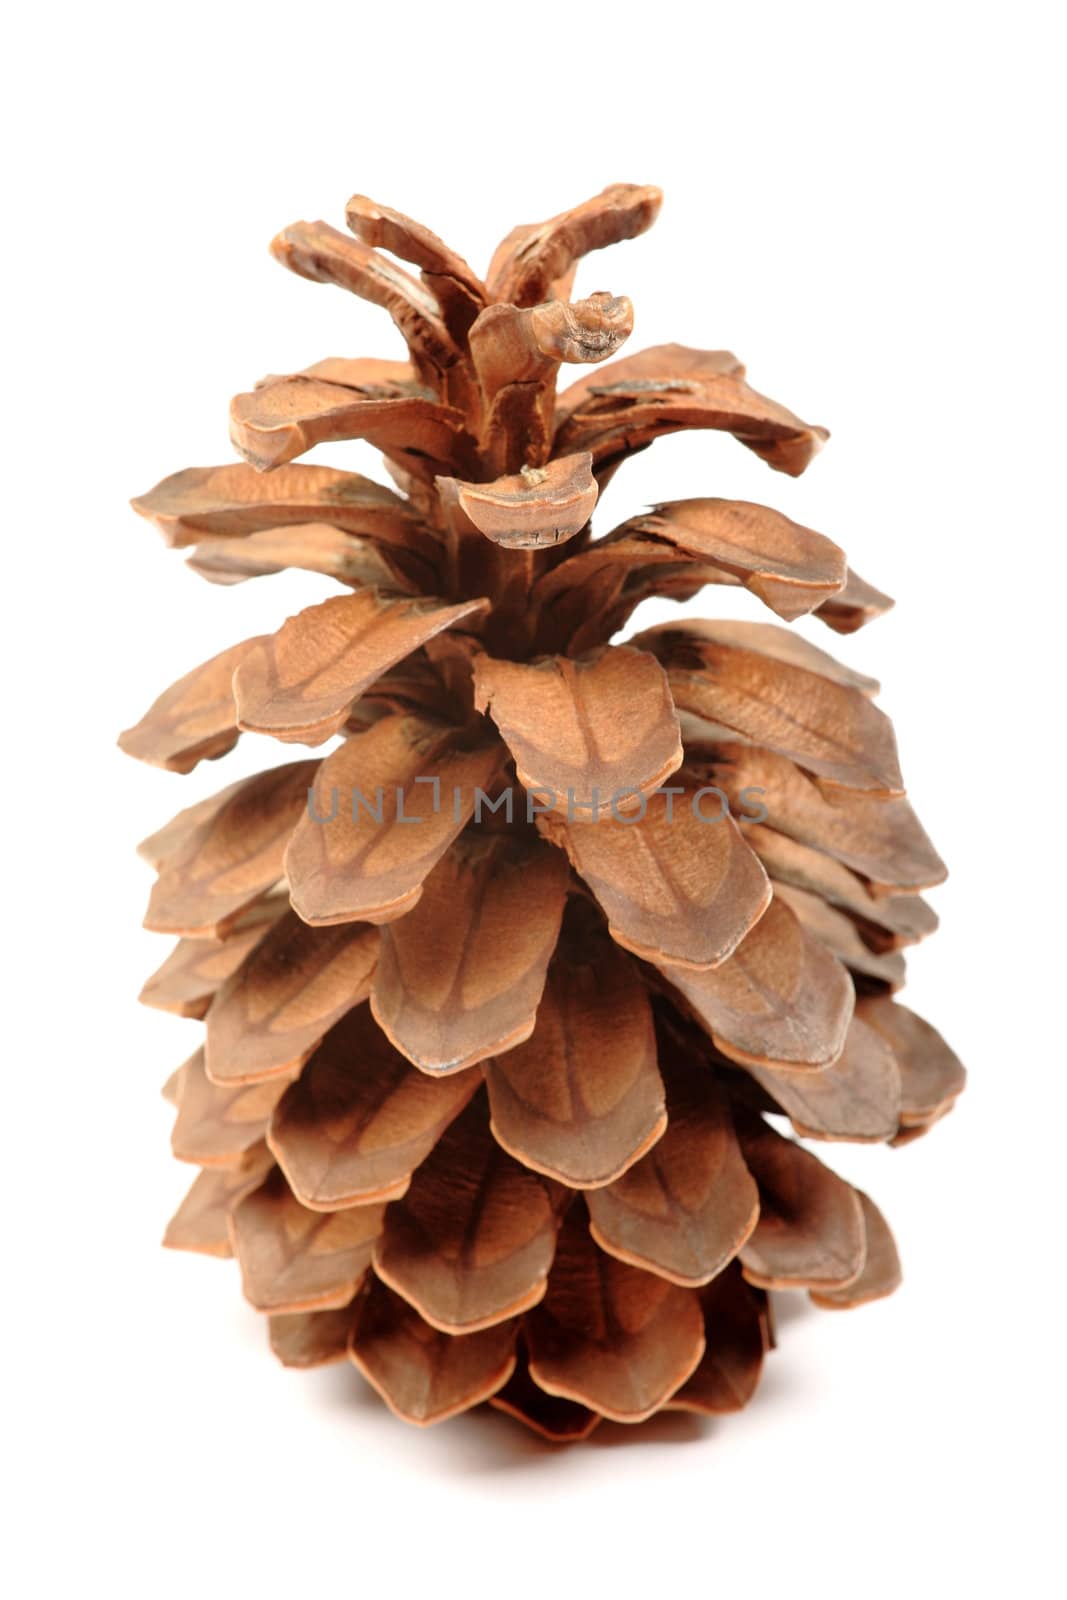 Big cone from Canary Island Tenerife isolated on white background. Endemic species.